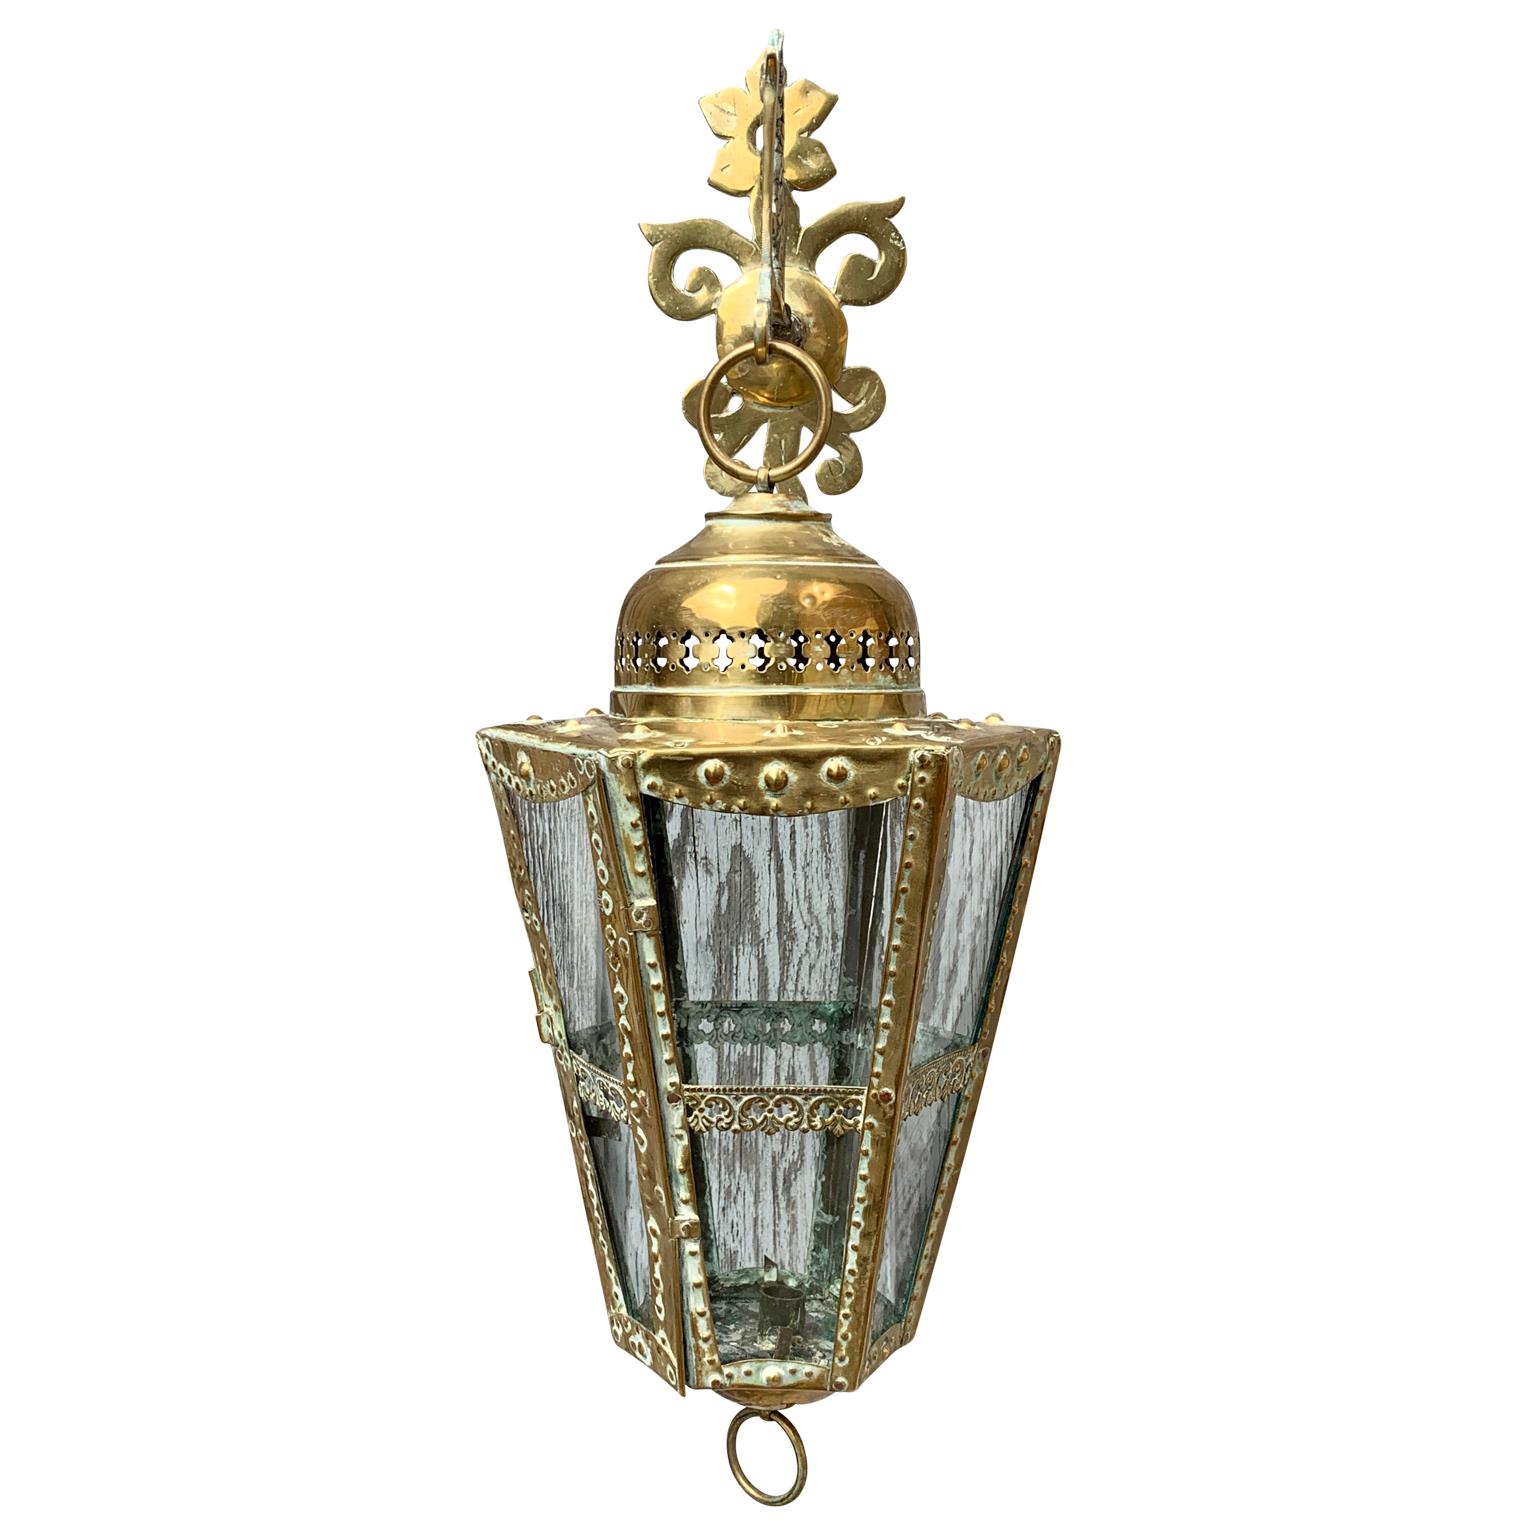 Wall mounted brass lantern, The Netherlands circa 1880.
An end of 19th century Dutch lantern for one candle in brass and old glass with original hanging part with the shape of a lion.